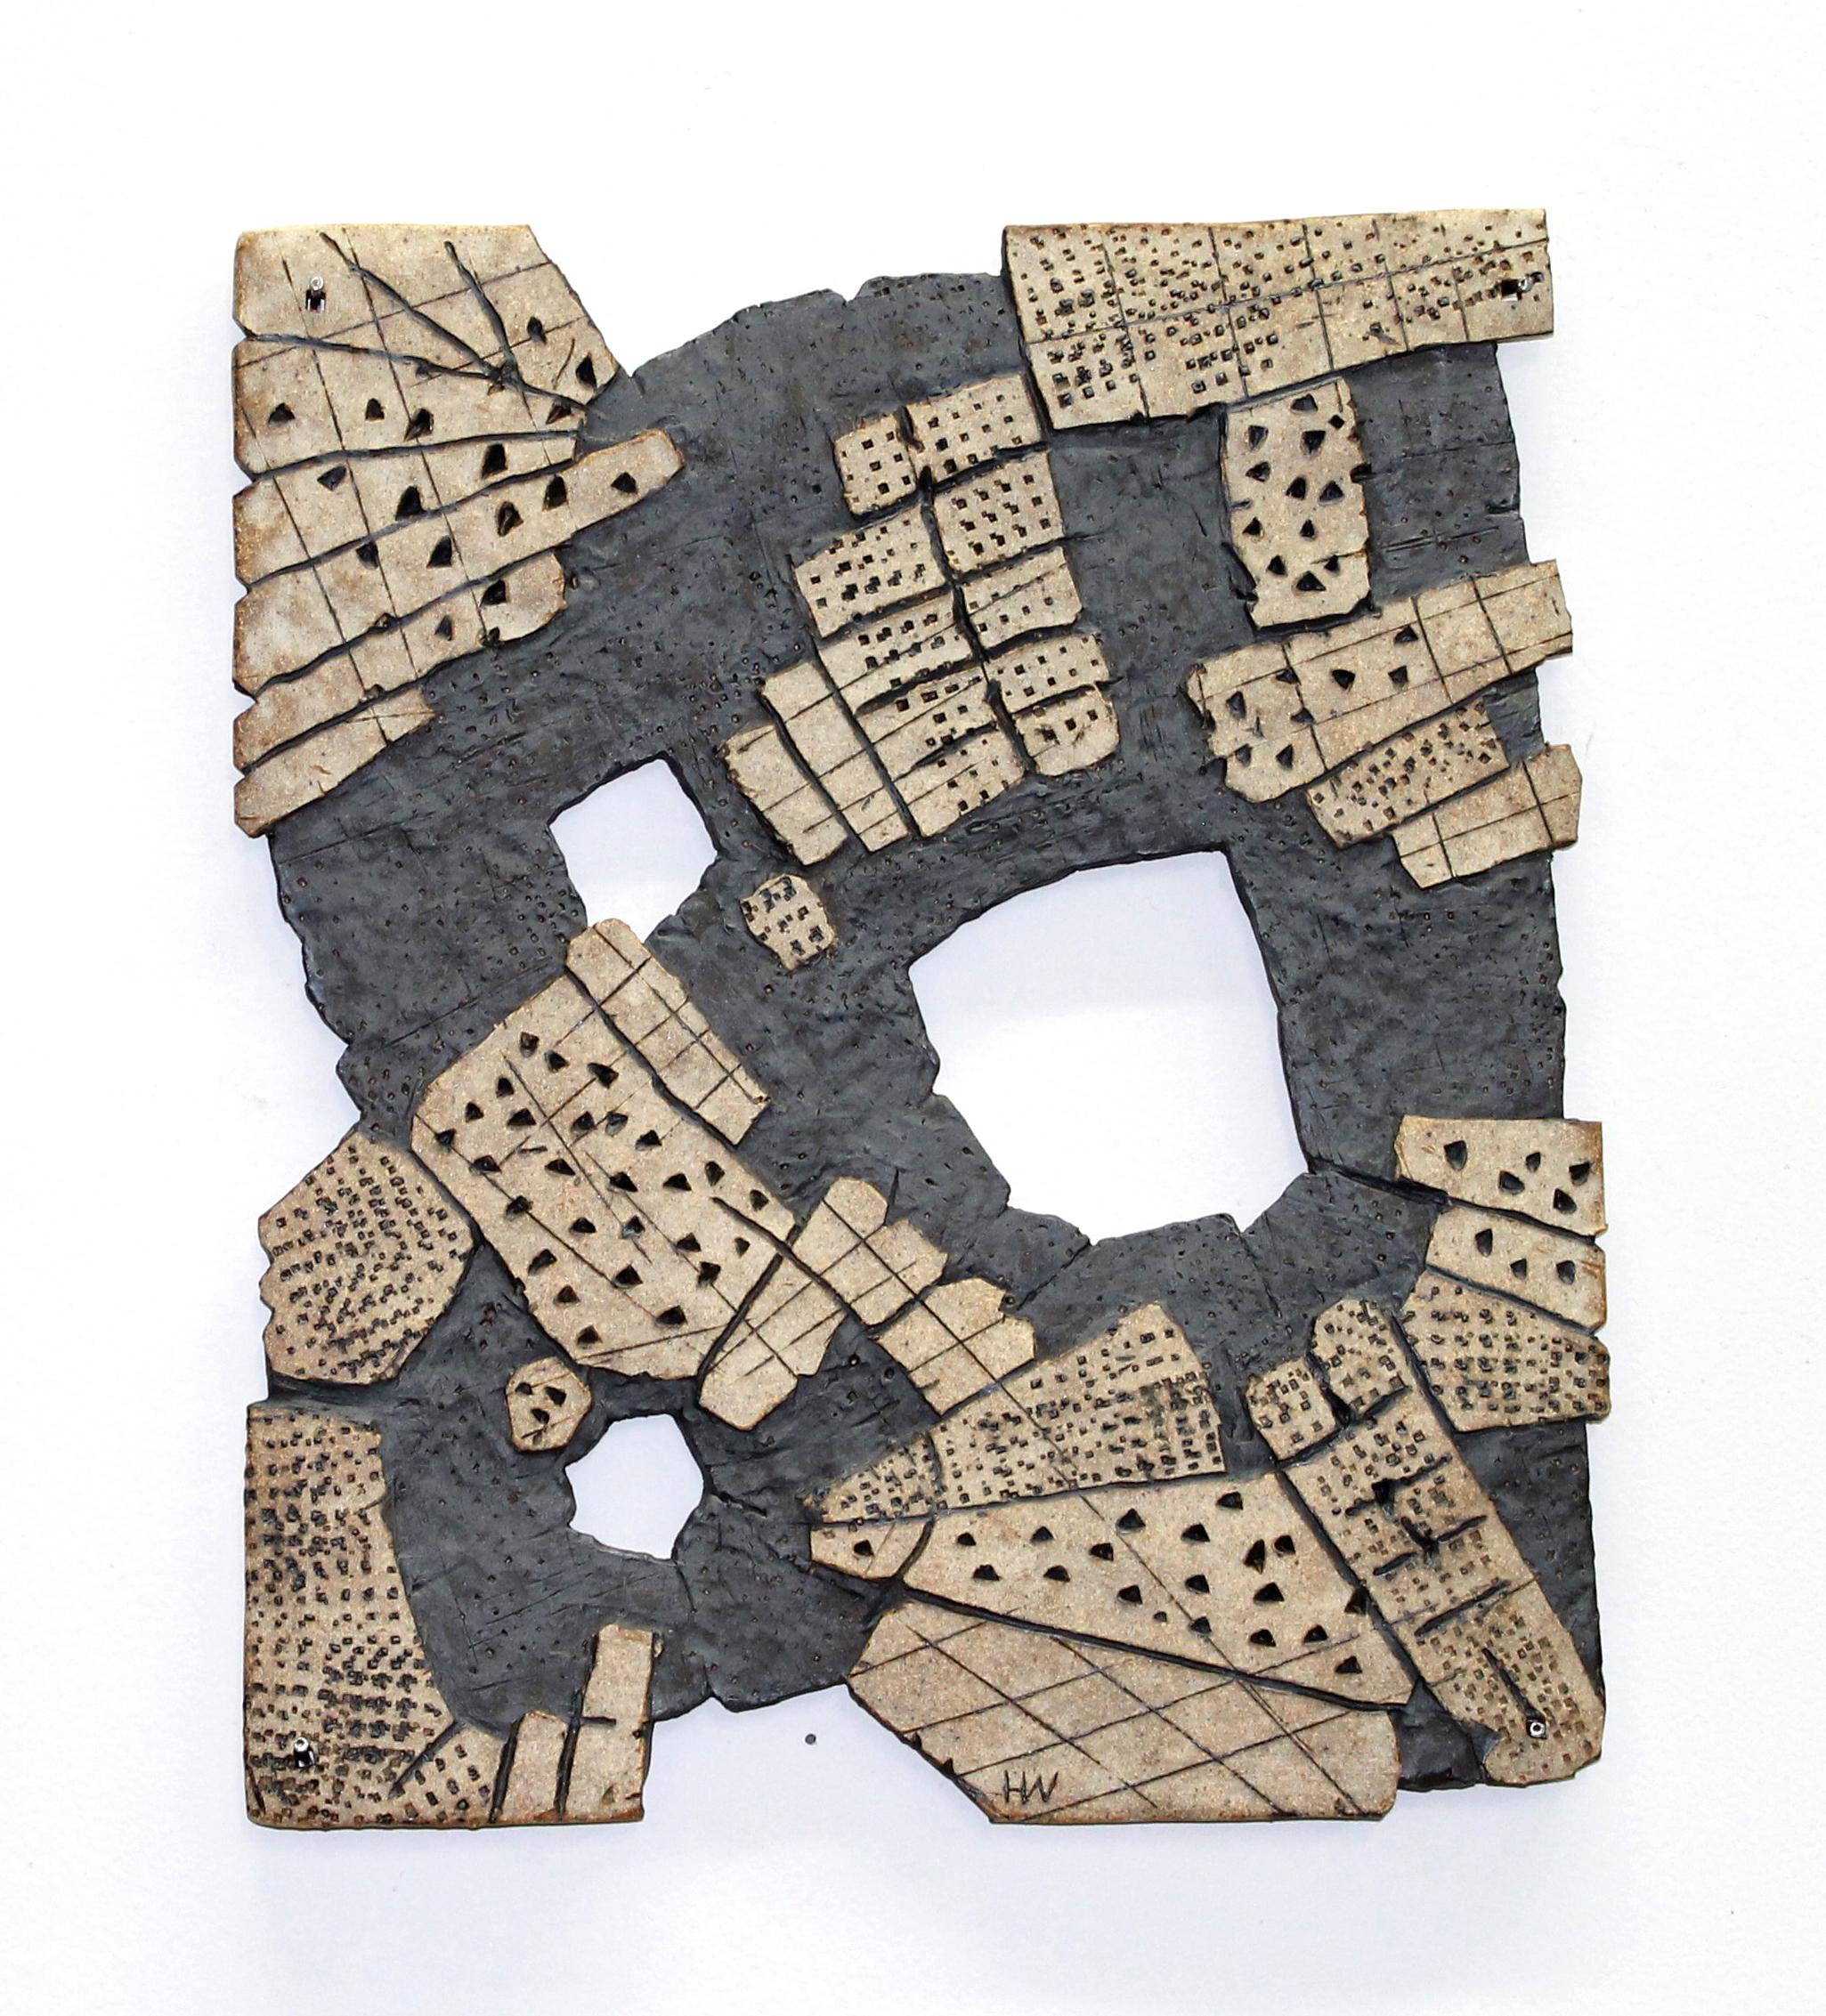 "MATHEMATICAL THEOREM", sculpture, clay, relief, abstract, contemporary, ceramic - Mixed Media Art by Harold Wortsman